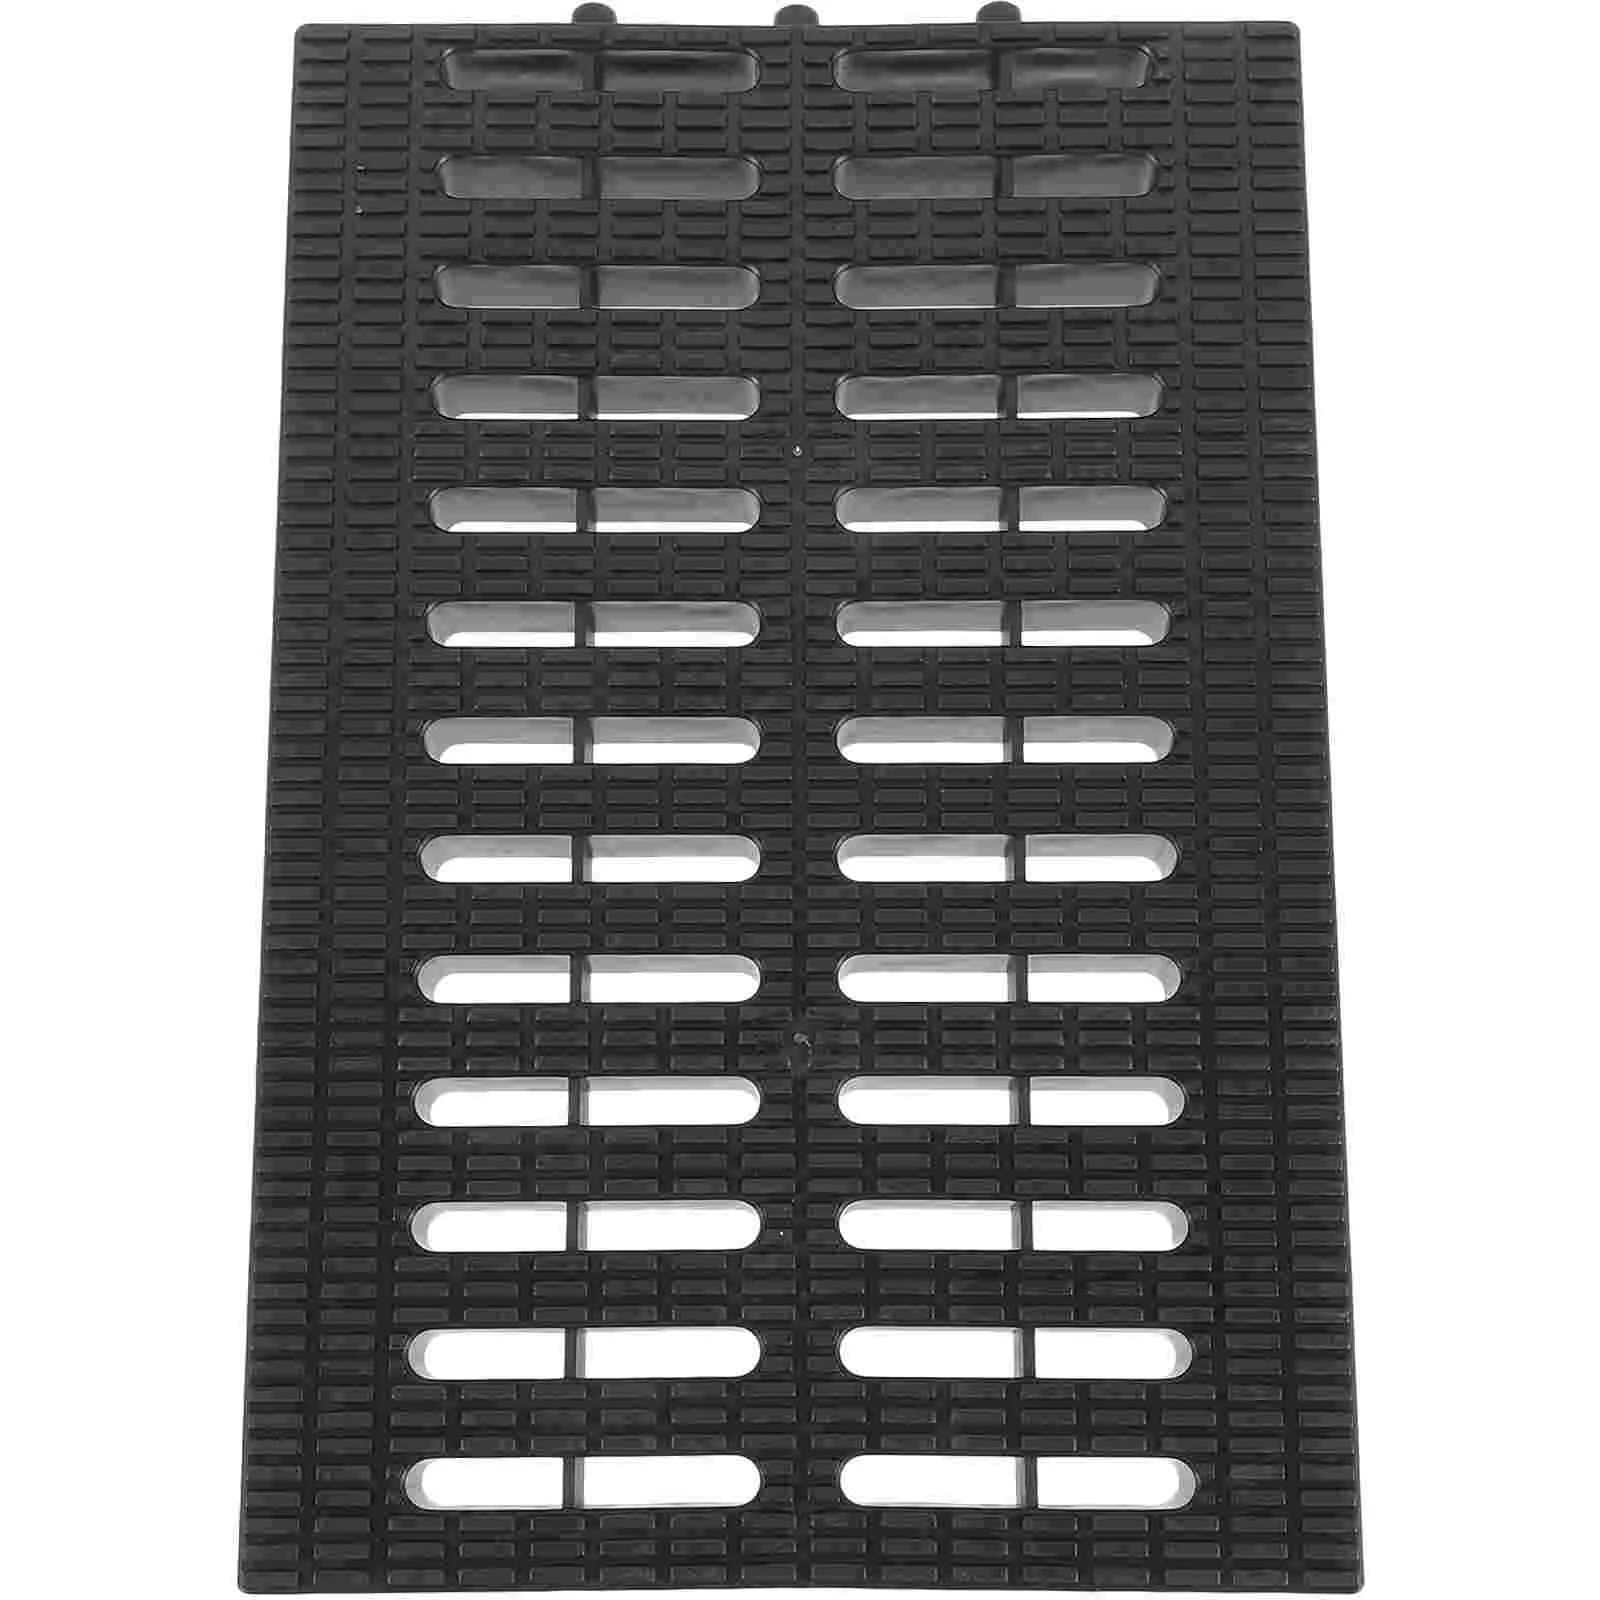 

Trench Cover Outdoor Sewer Plastic Grate Basement Drain Plate Channel Garage Floor French System Yard